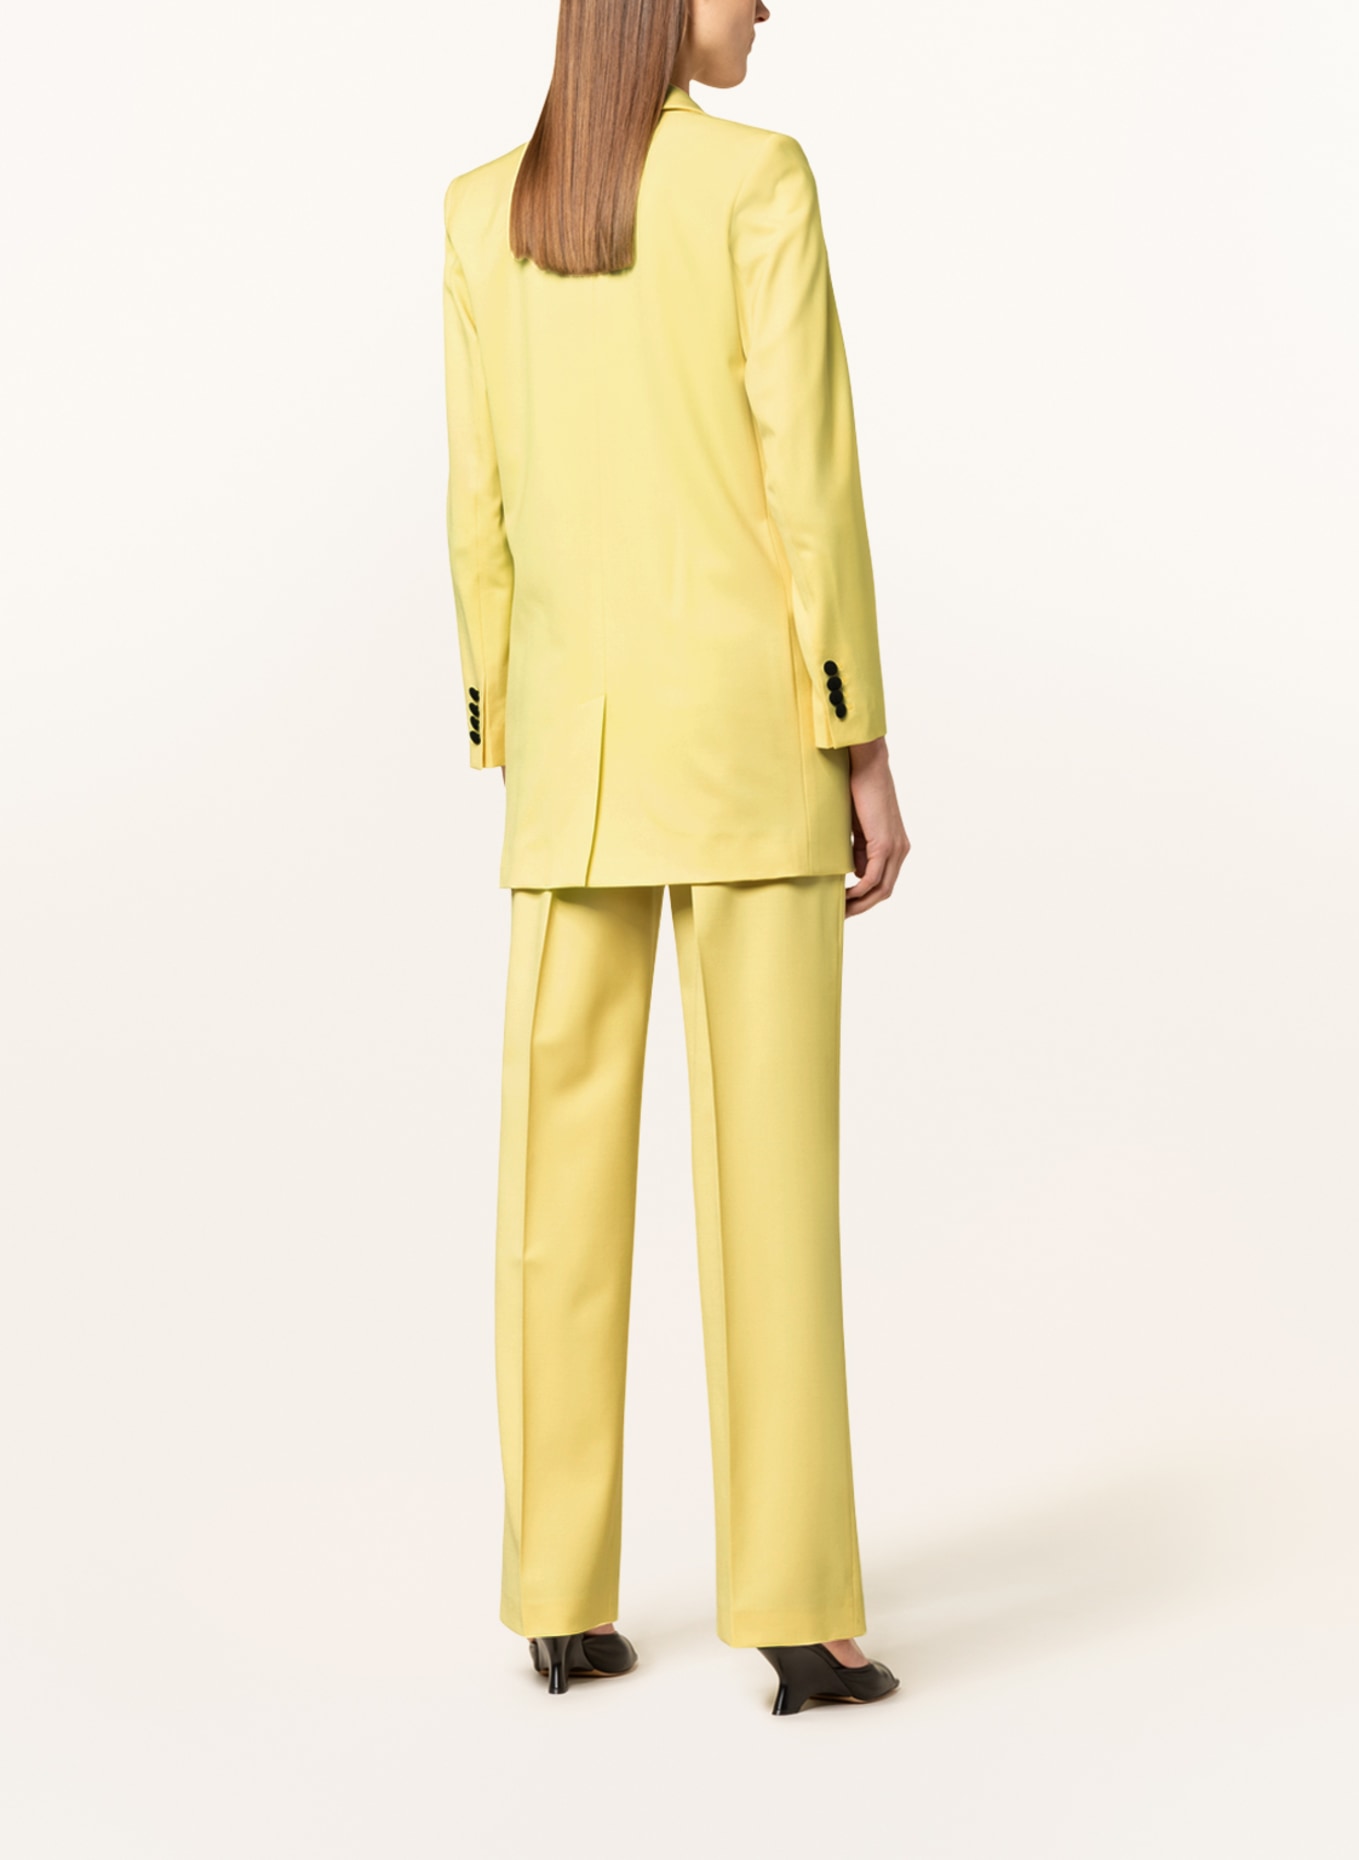 MARCELL VON BERLIN Oversized blazer, Color: YELLOW (Image 3)